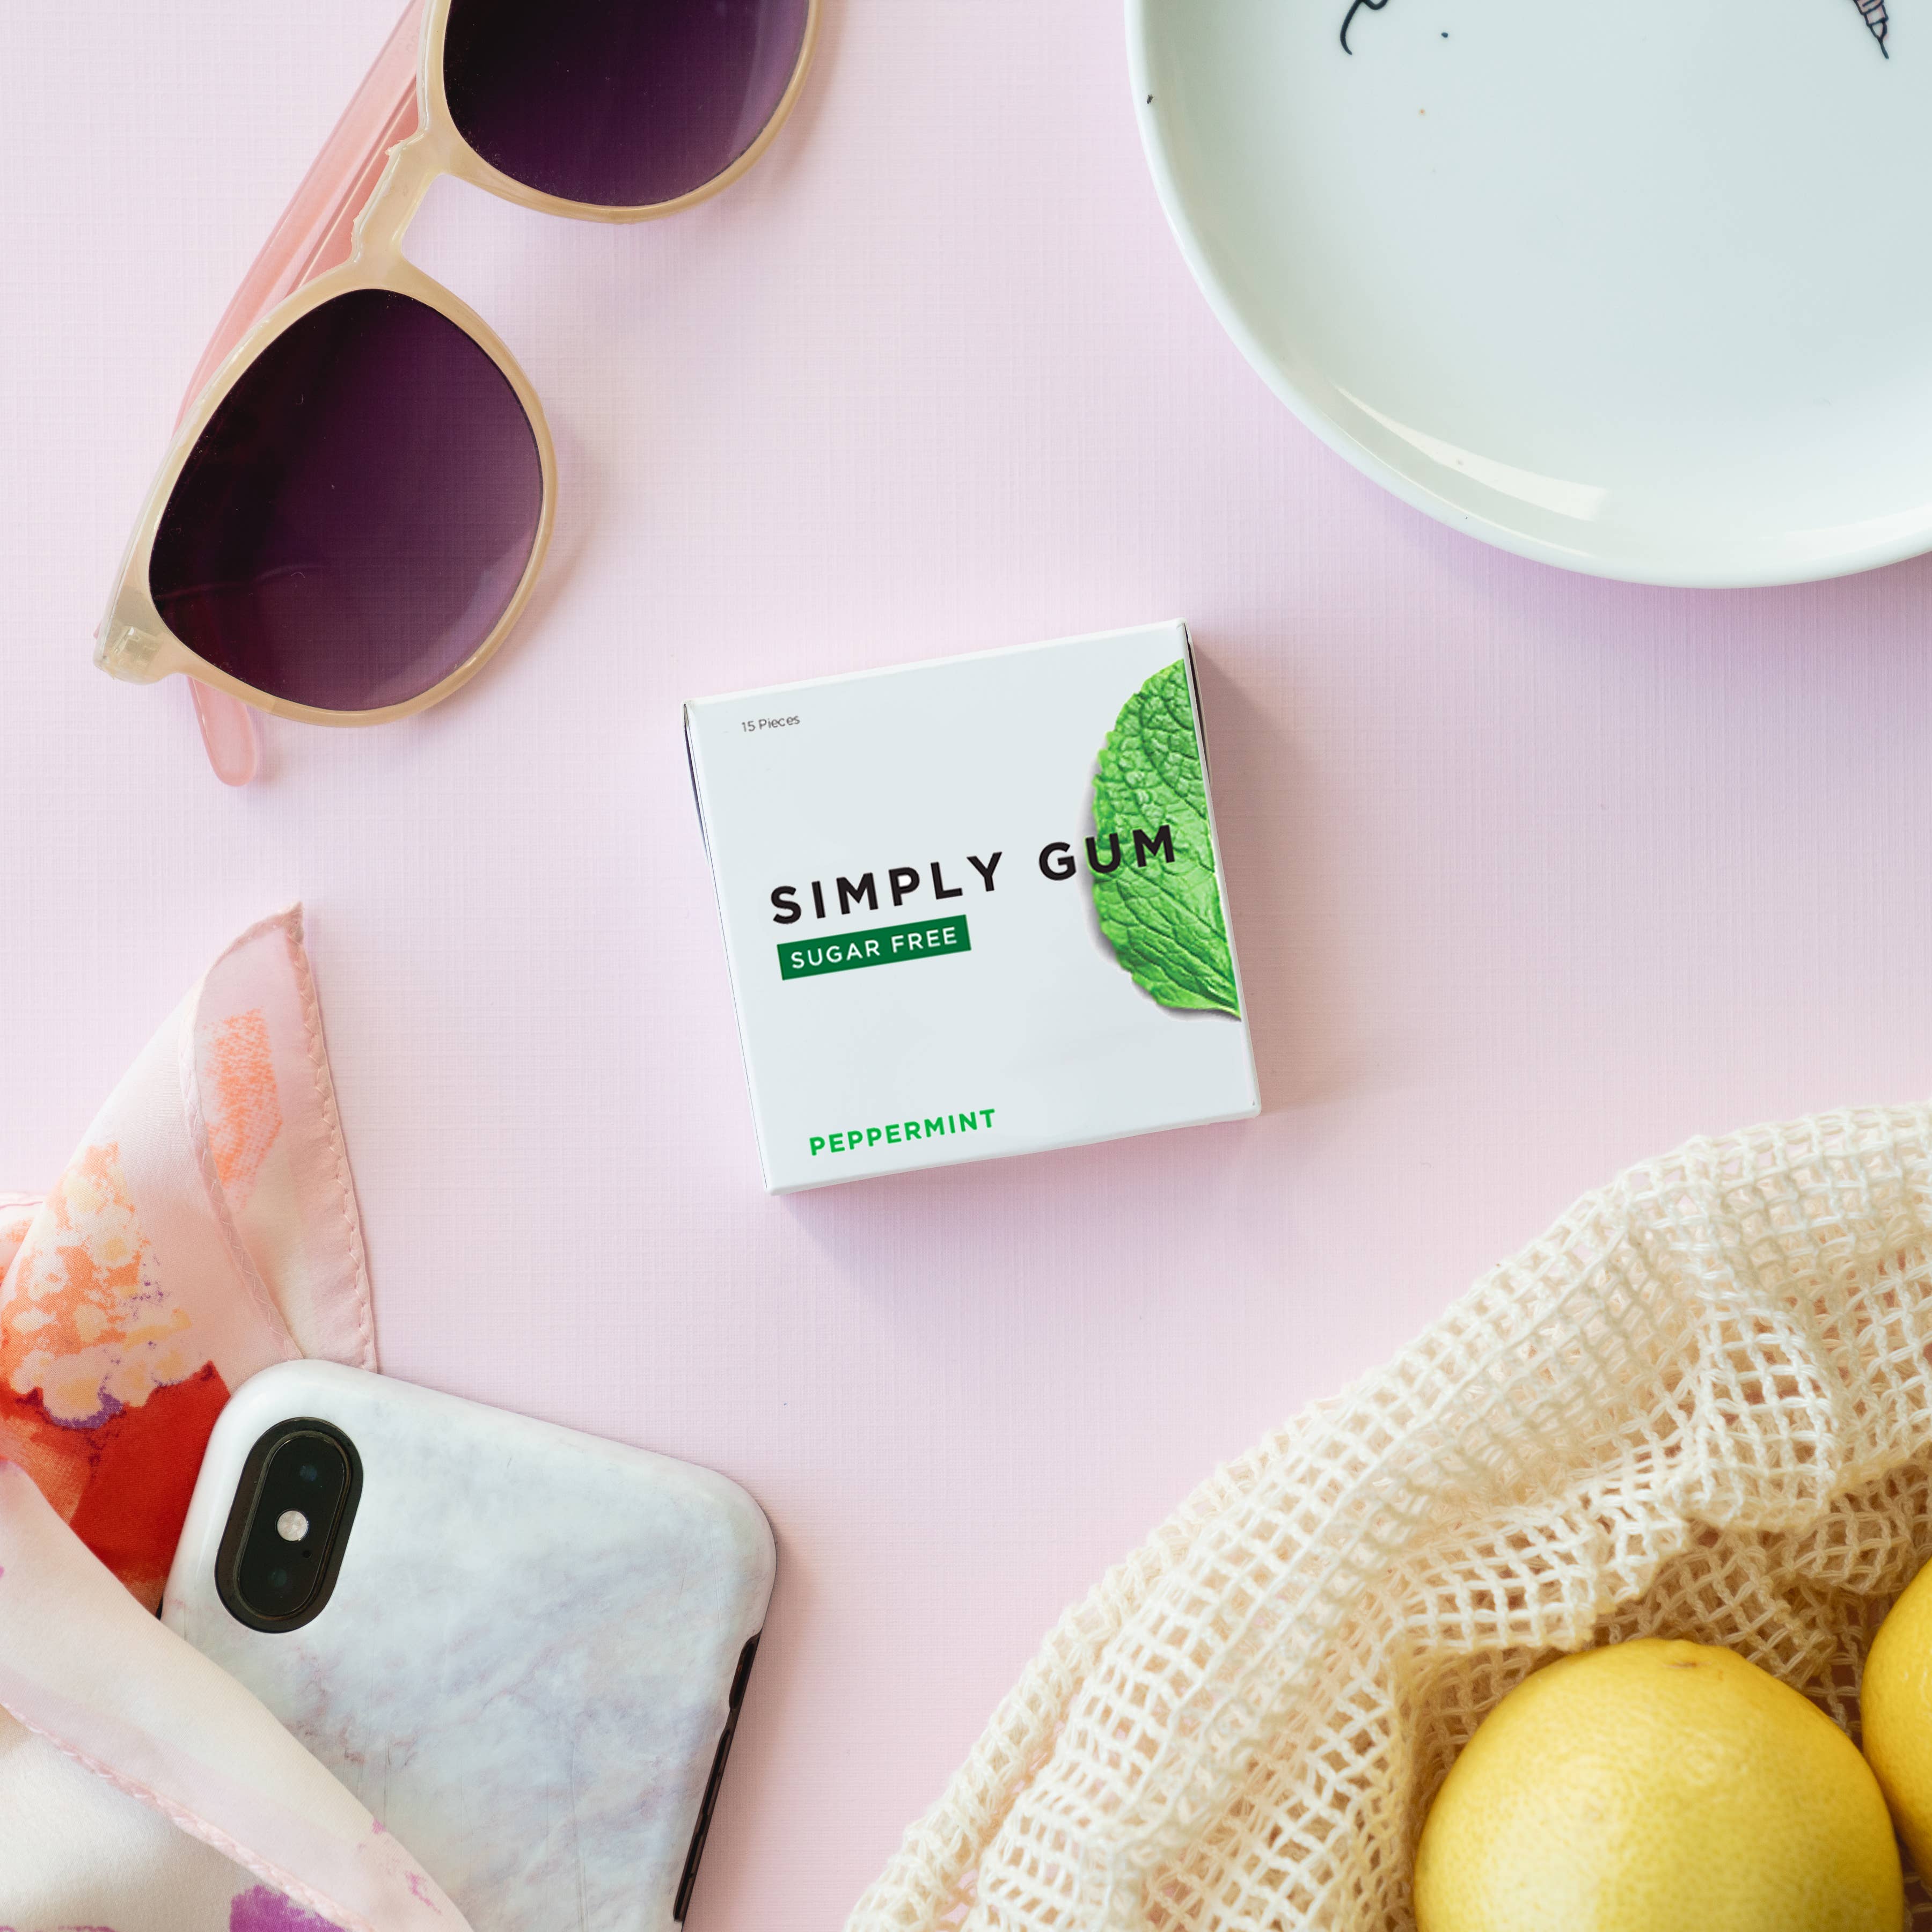 Sugar Free Peppermint Natural Chewing Gum